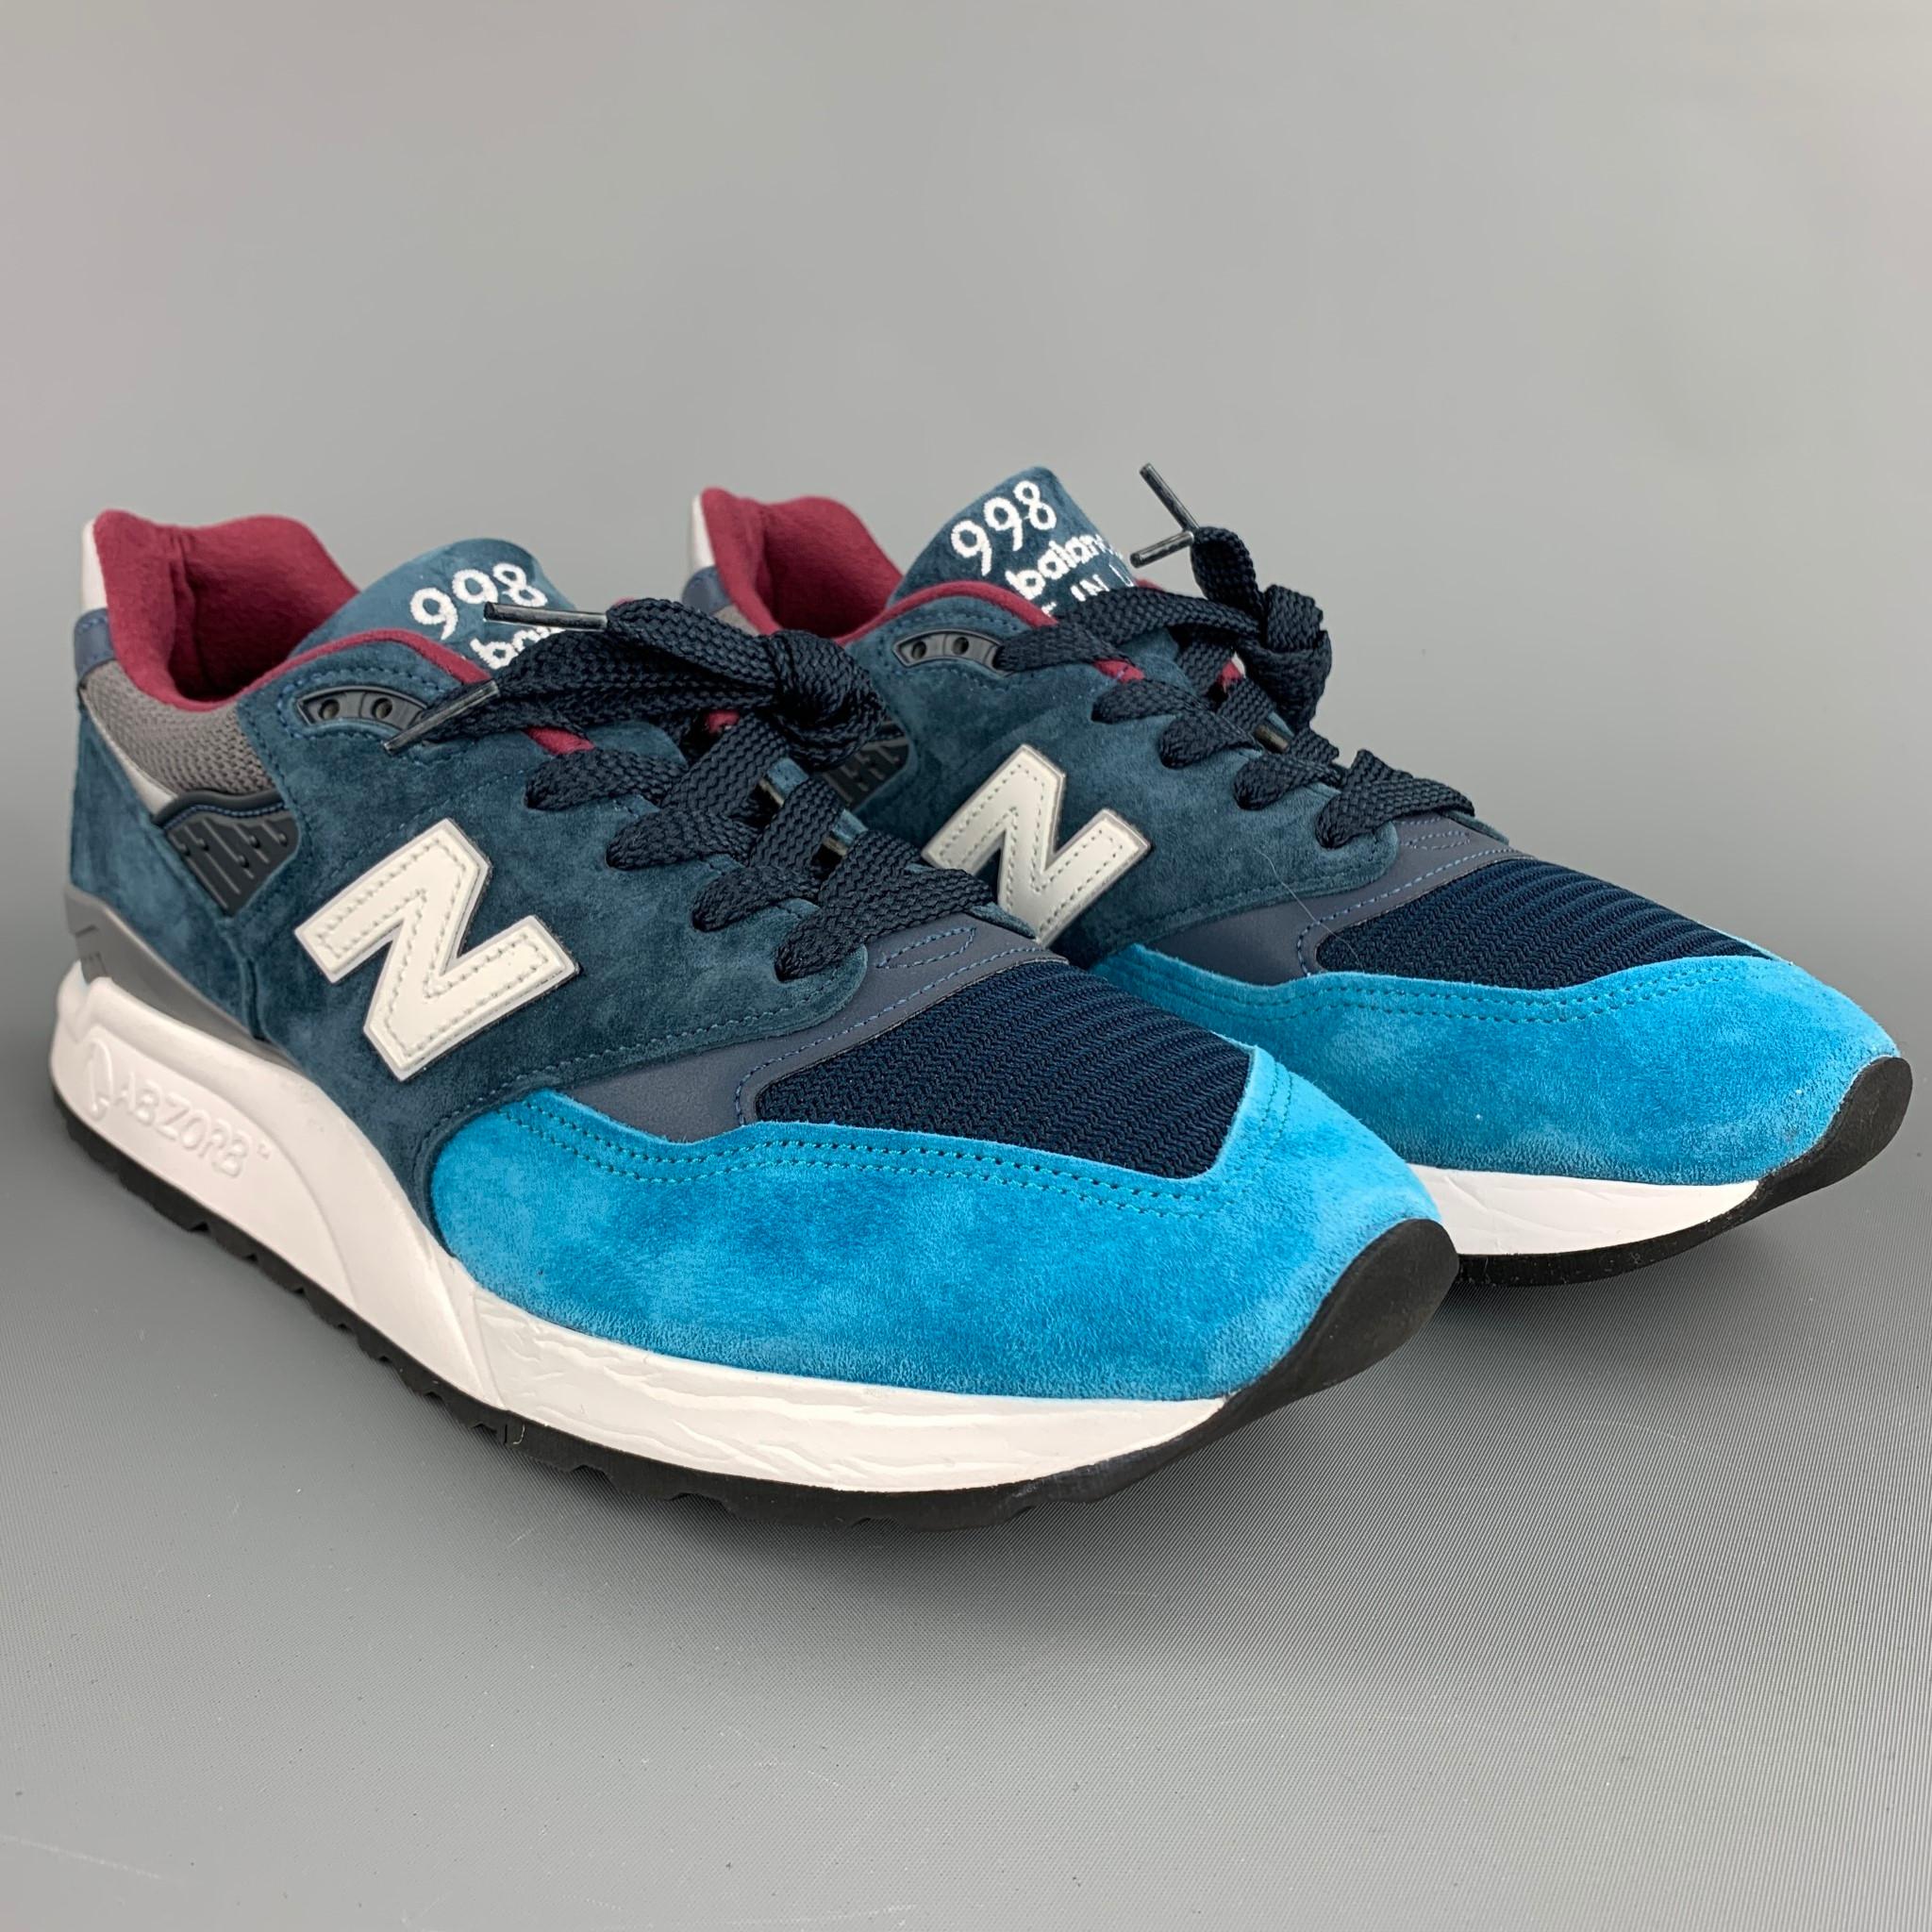 NEW BALANCE 998 sneakers comes in a blue suede with a color block design featuring a rubber 